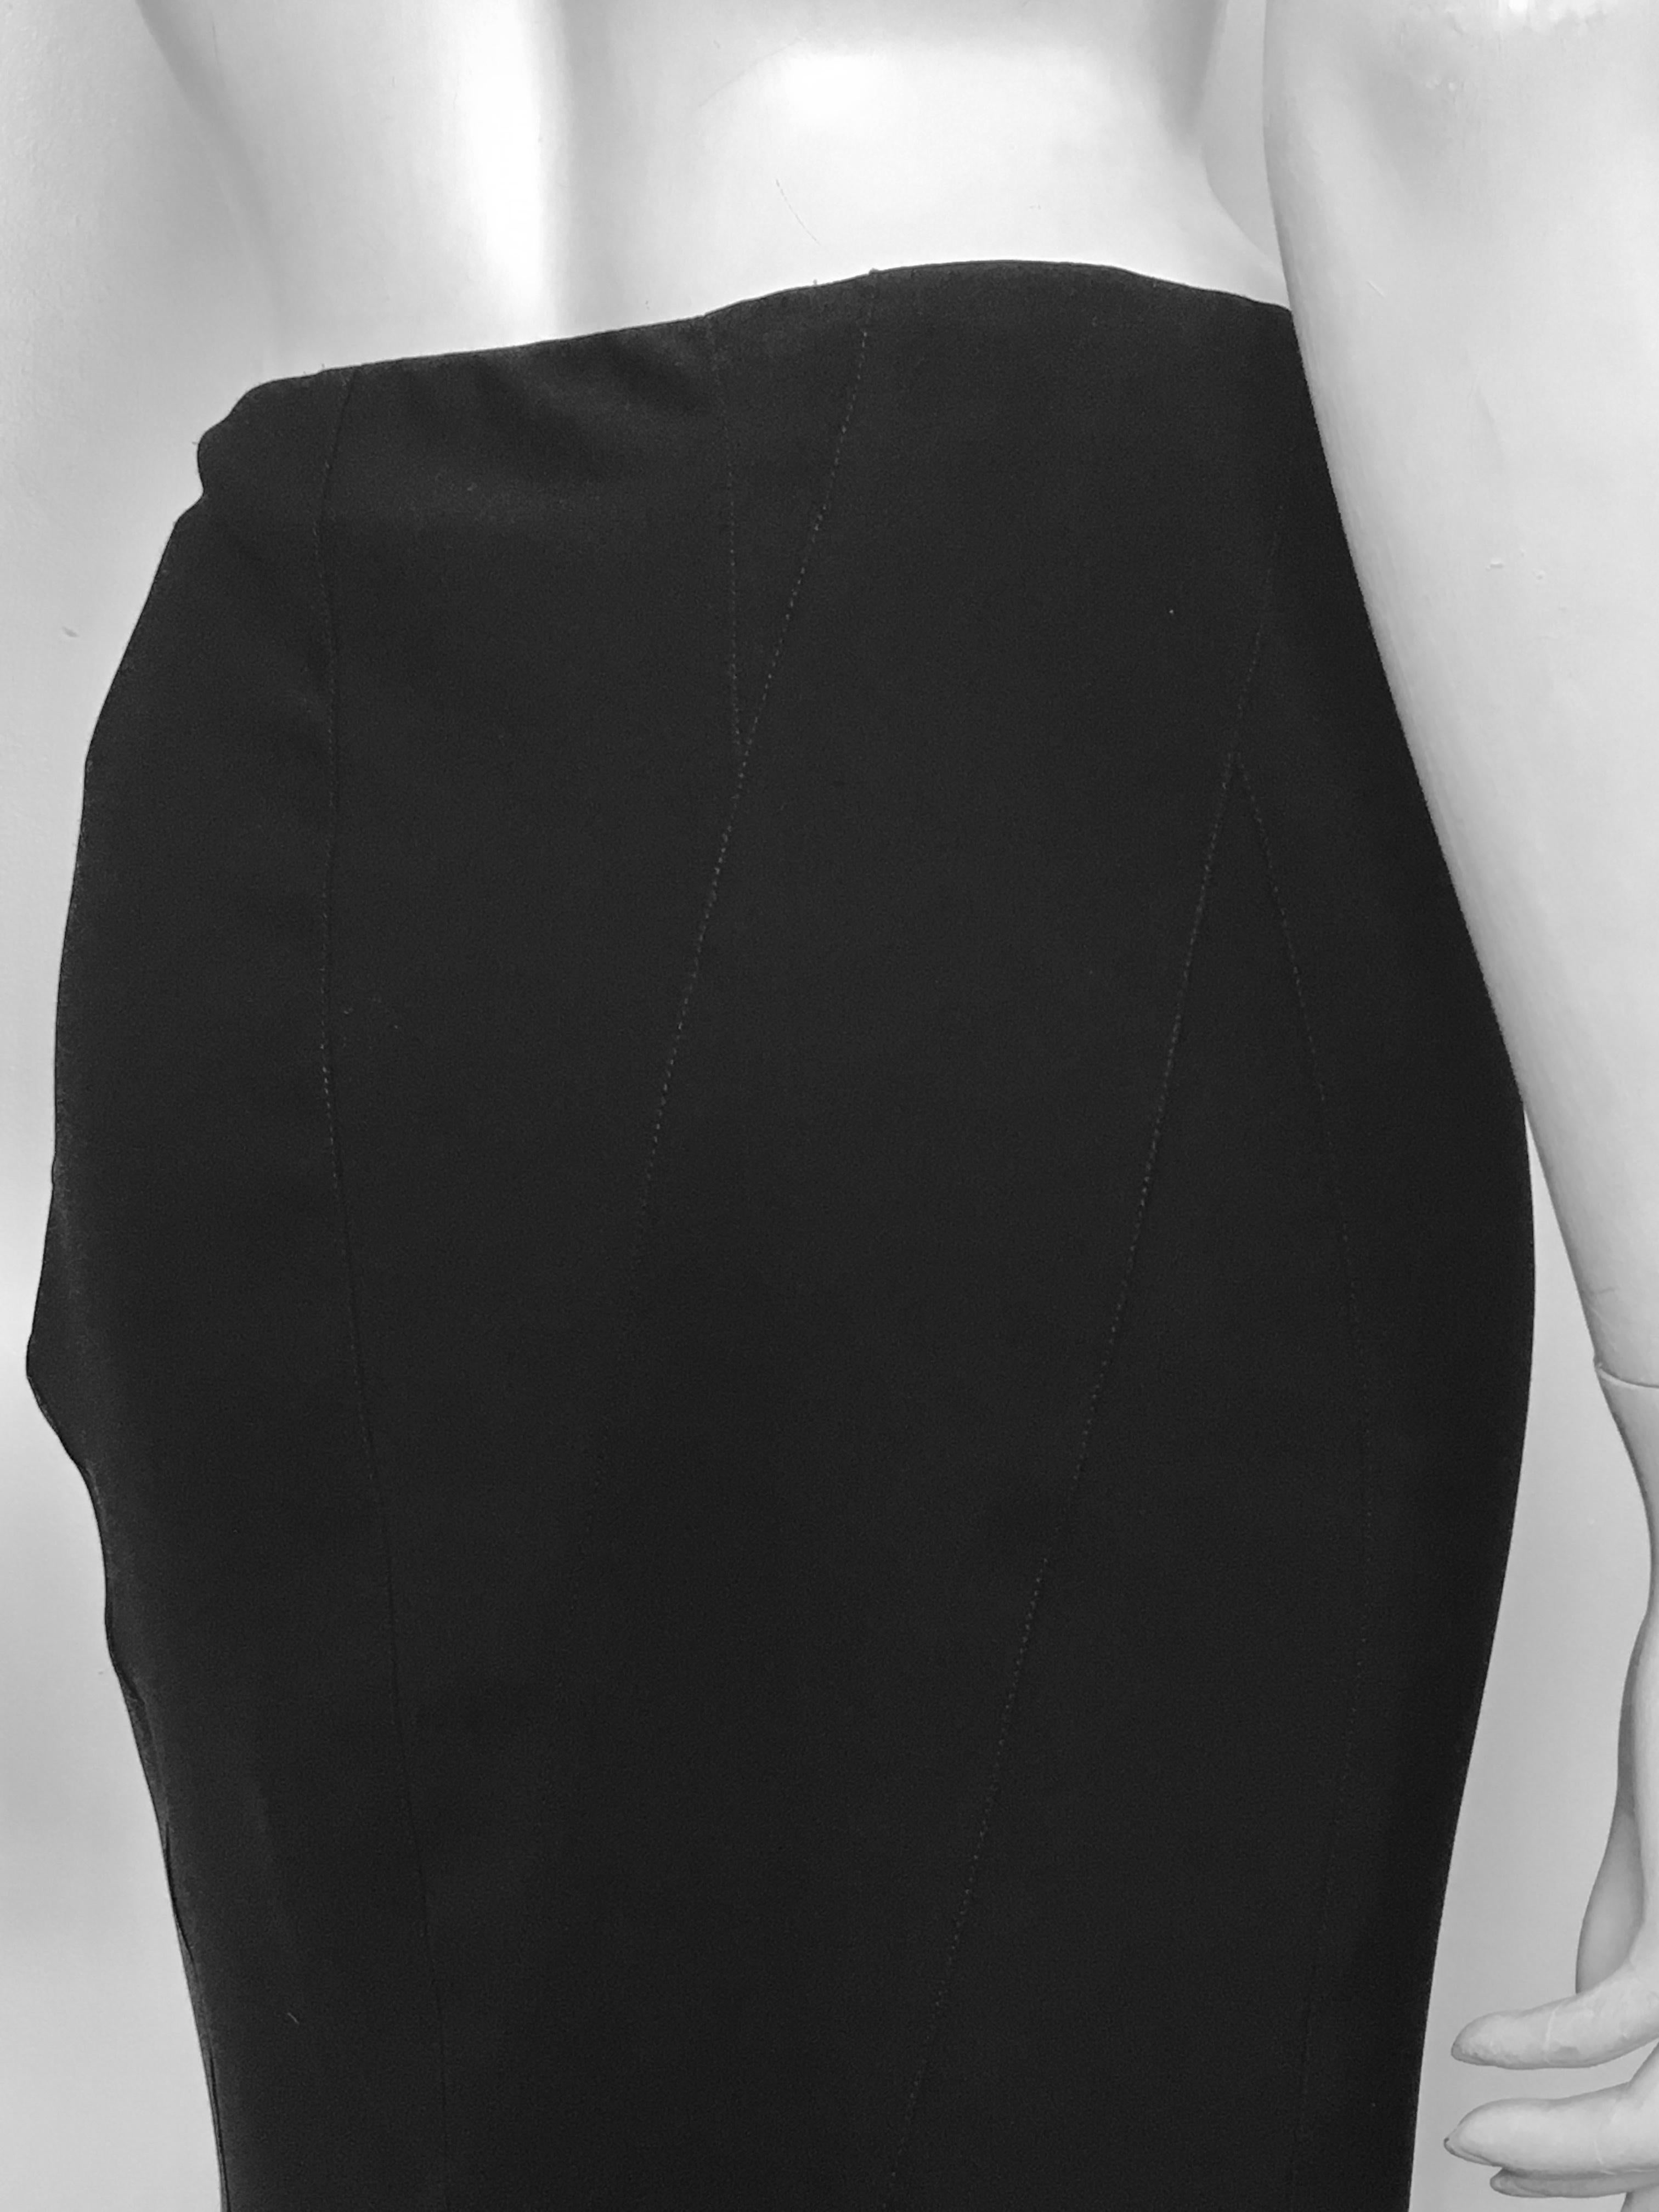 Donna Karan 1990s Black Sheer Skirt Size 8, made in Italy. For Sale 4